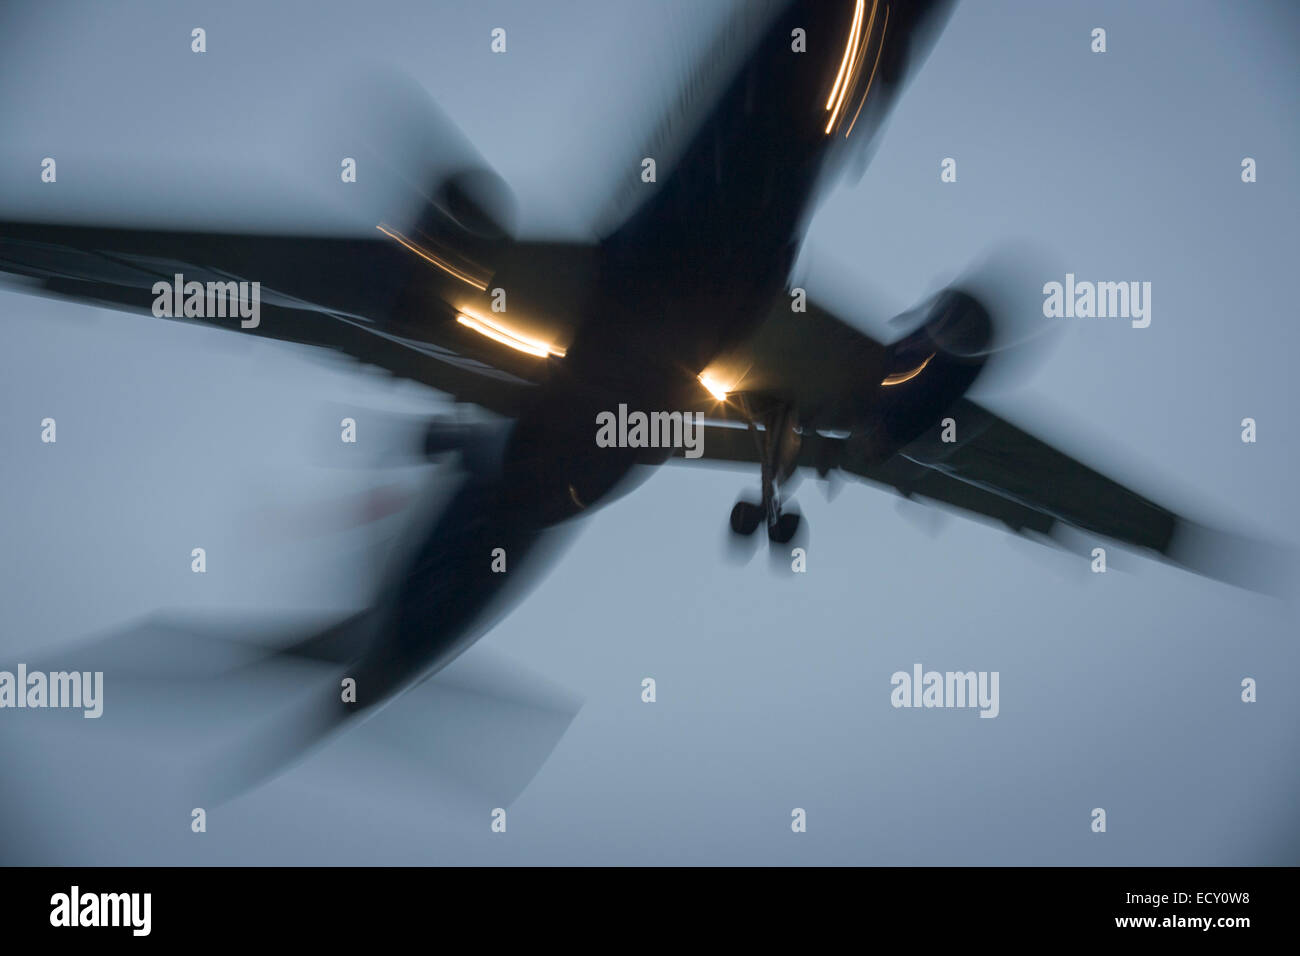 With bright landing lights on, blurred jet airliner lands at London Heathrow airport. Stock Photo